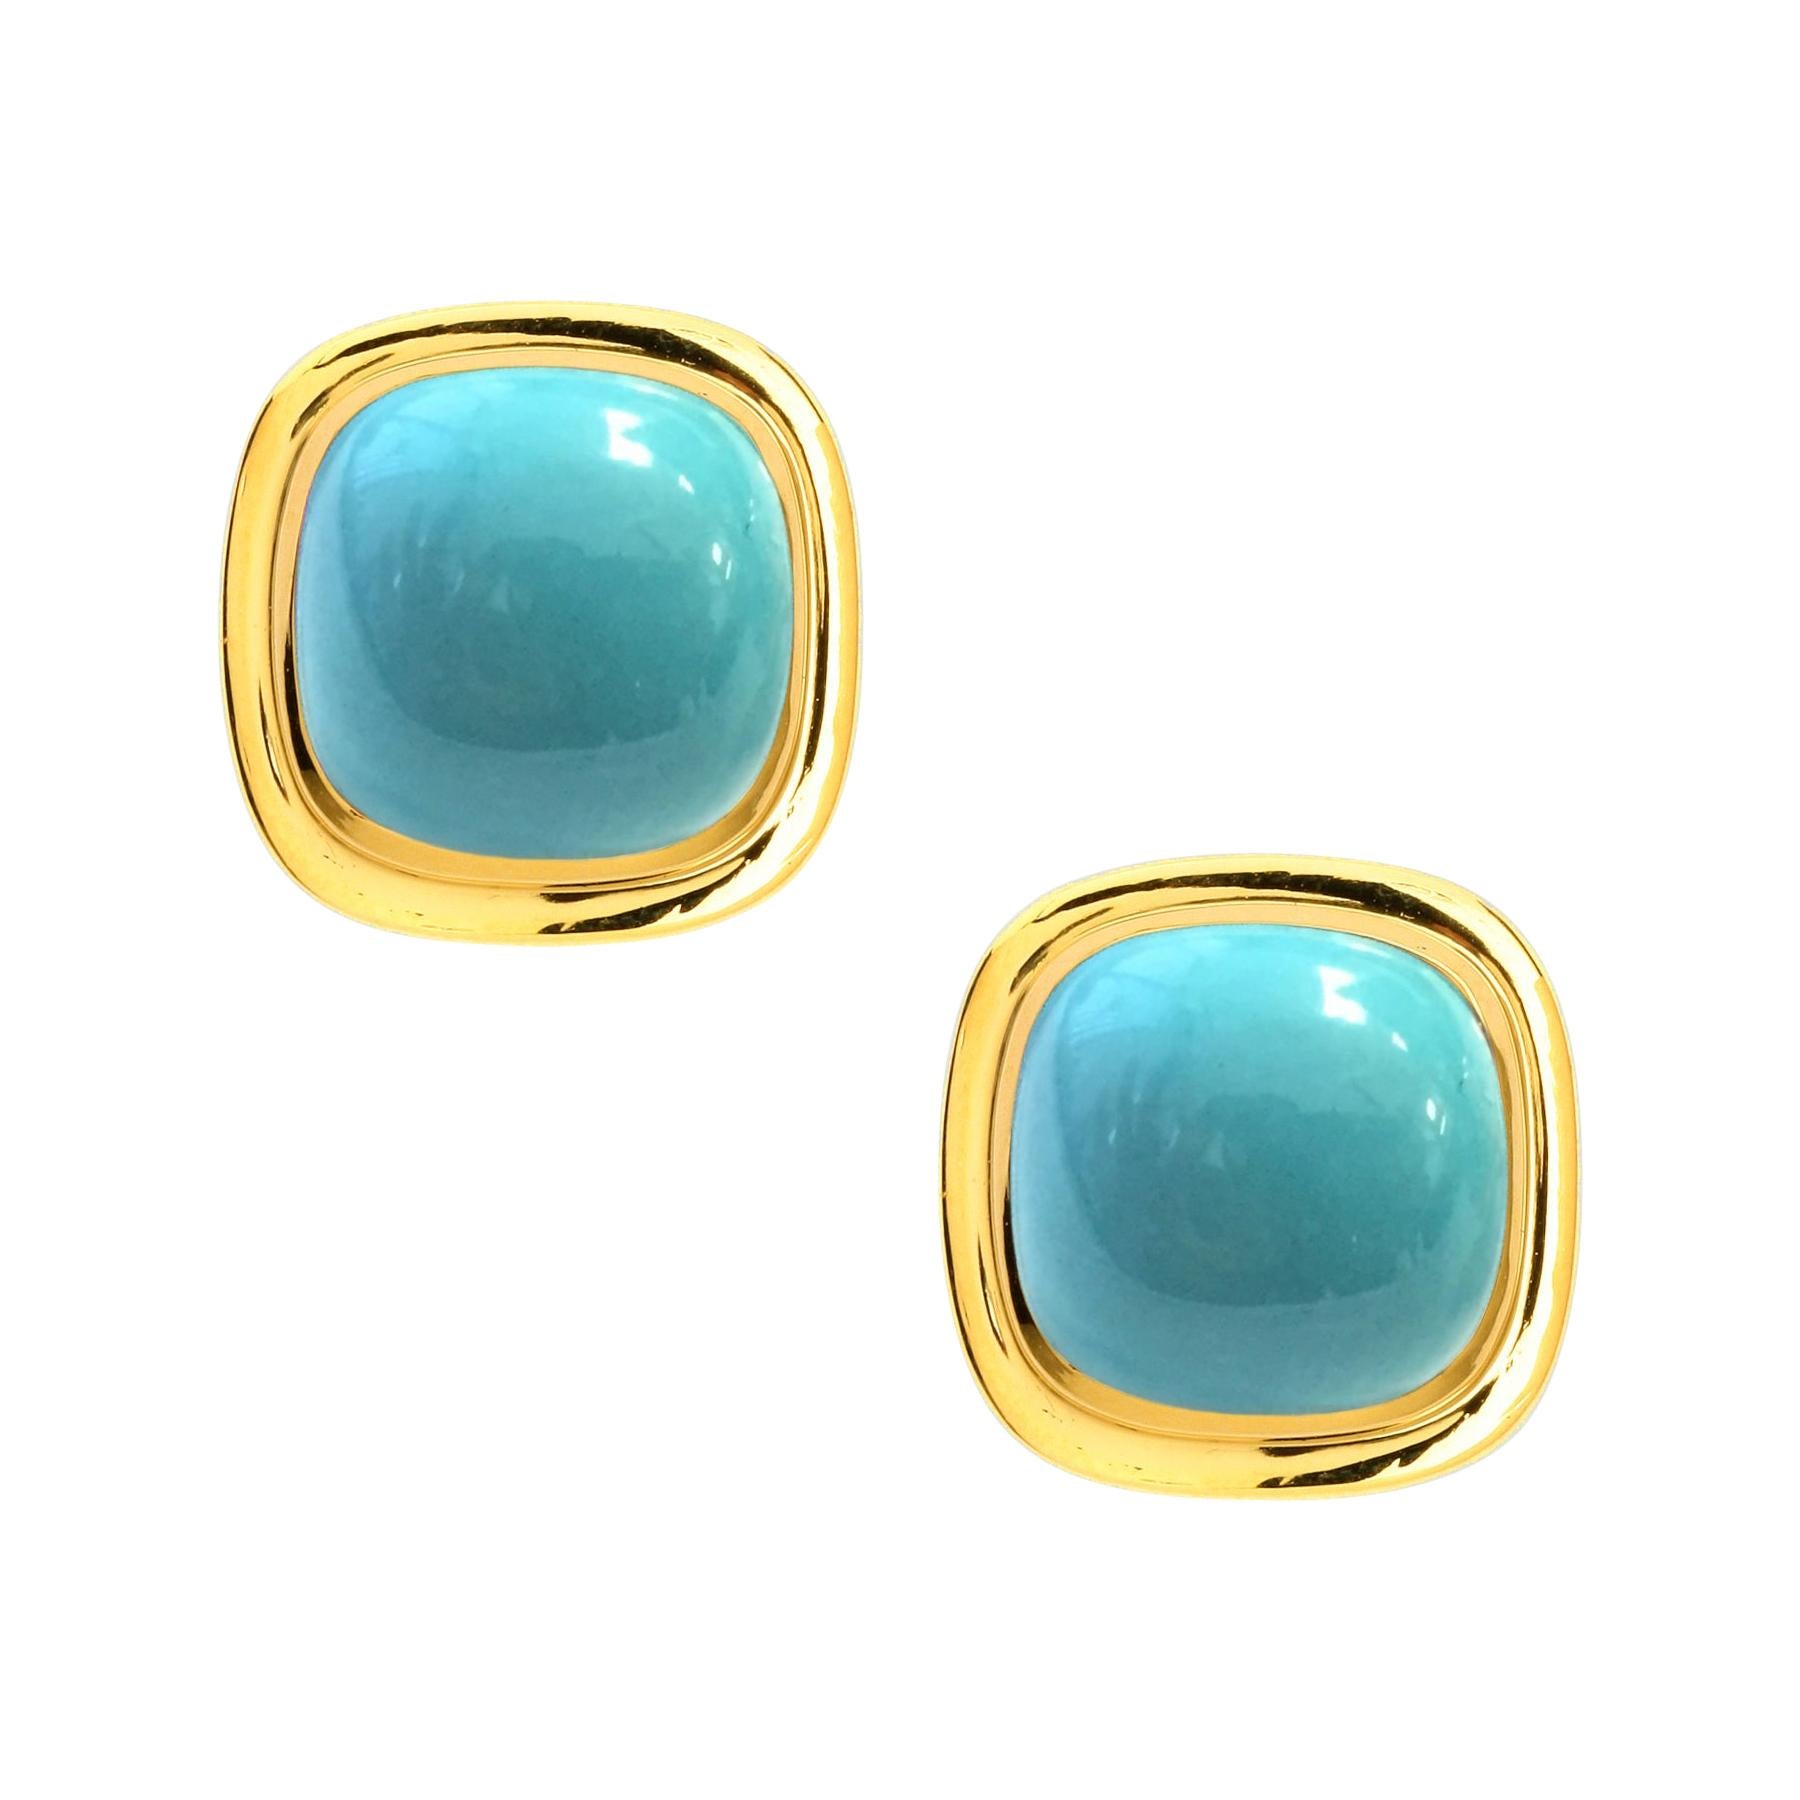 Syna Yellow Gold Sugarloaf Sleeping Beauty Turquoise Earrings